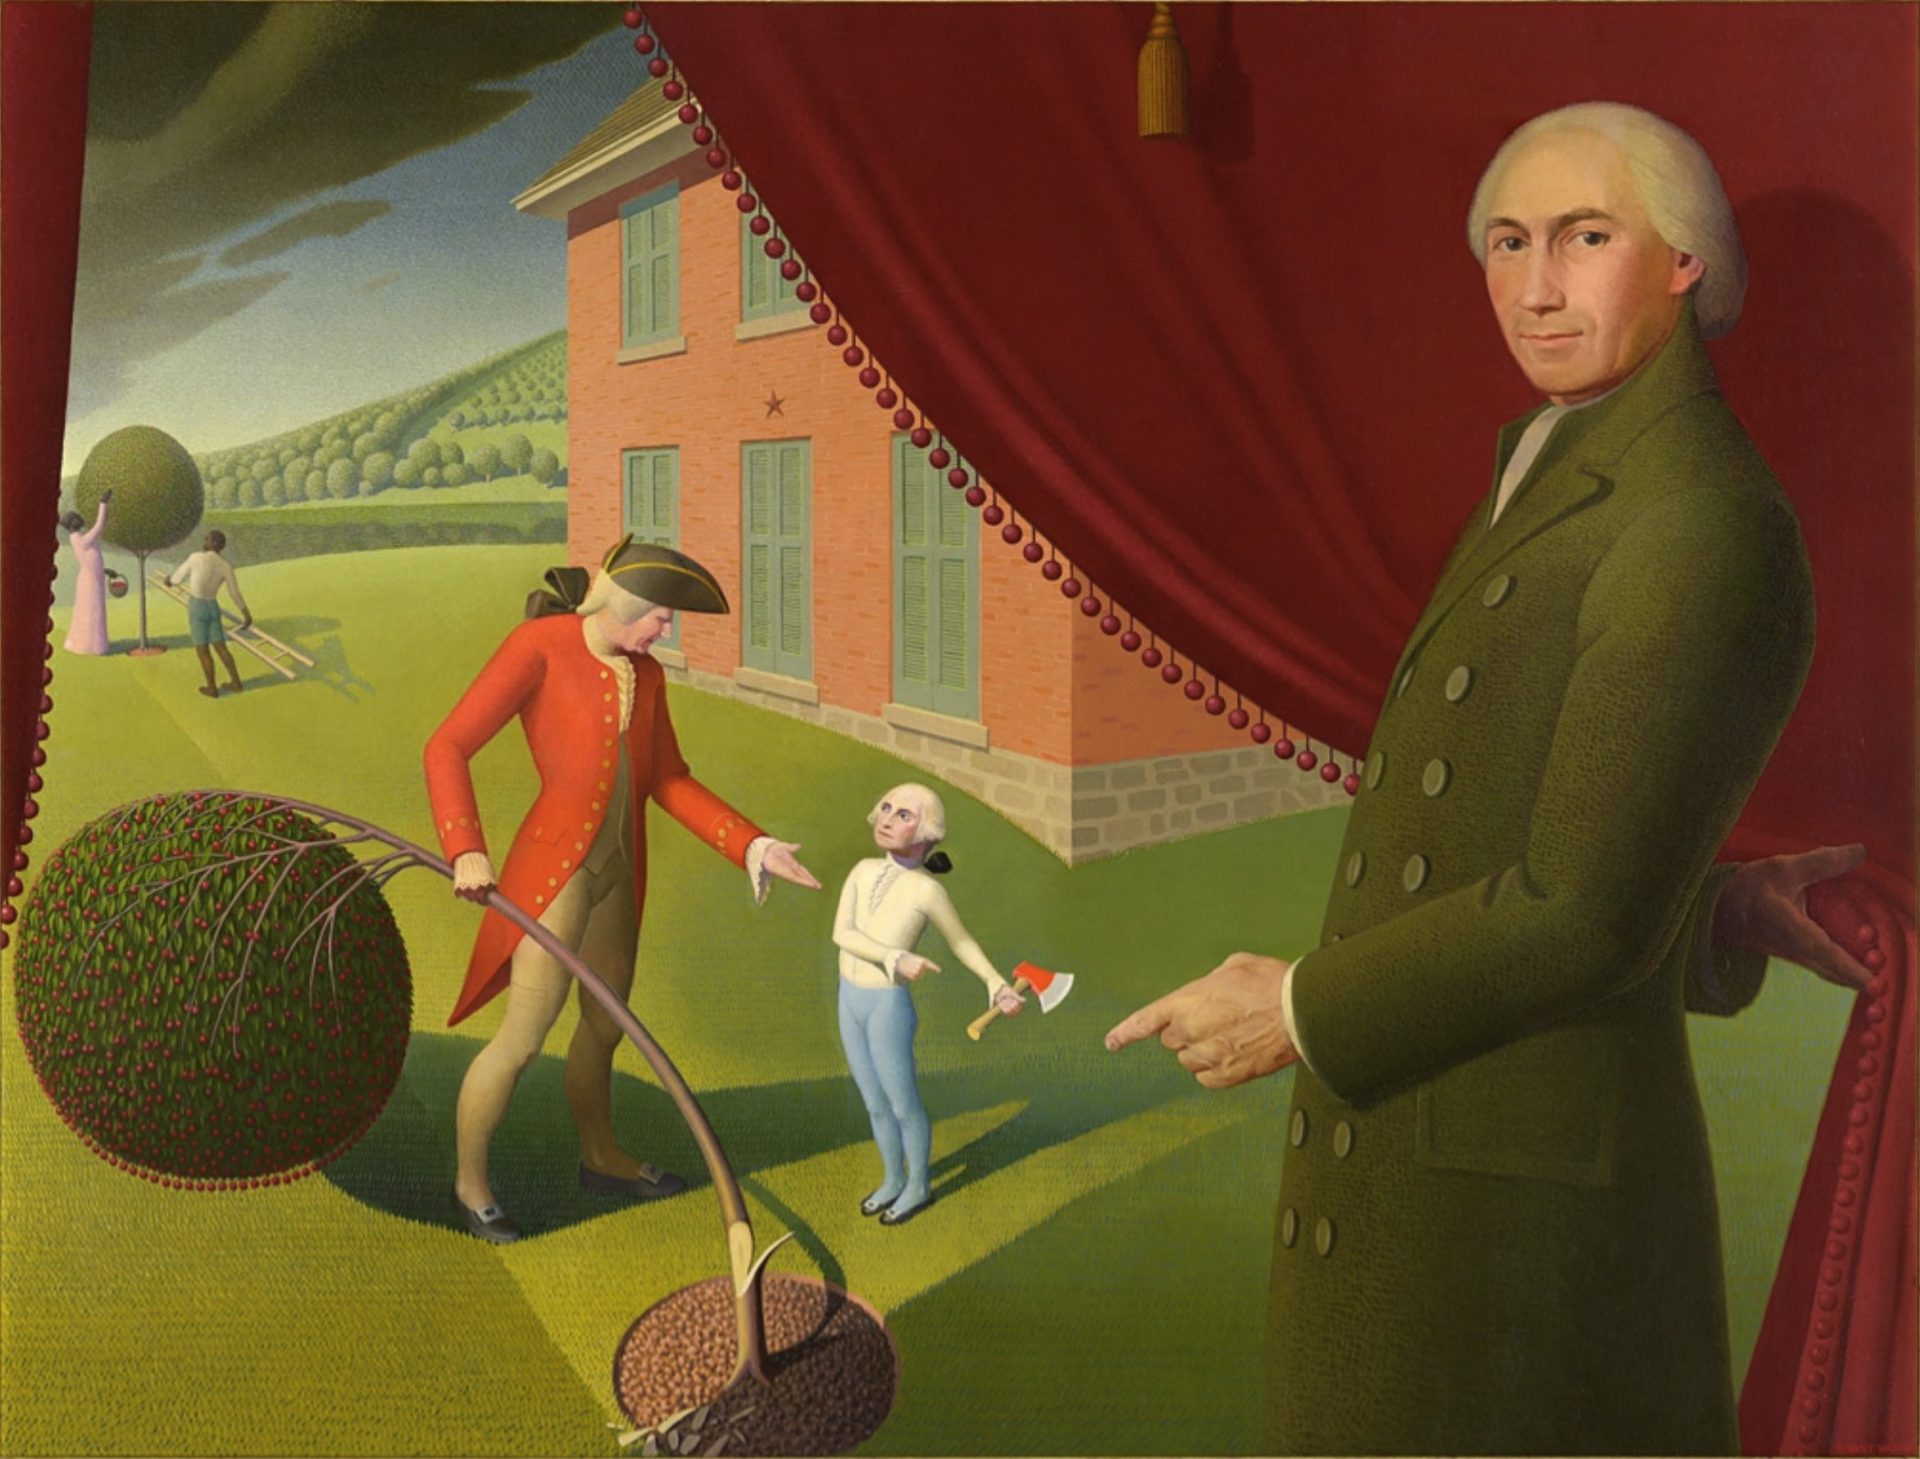 A whimsical, theatrical depiction of the mythical story of George Washington chopping down a cherry tree as a boy. In the center of the image, young George Washington stands holding an axe with a fallen cherry tree in front of him, while his father sternly looks at him. They're shown on a stage-like setting with heavy red curtains being pulled aside by a man, presumably Parson Weems, who is also the author of this fable. The painting is filled with rich, bright colors, and features exaggerated perspective and detailing to emphasize the theatrical and fictional nature of the scene. A visual pun is introduced through the cherry-patterned curtains that match the cherry tree, adding a sense of playfulness to the scene.